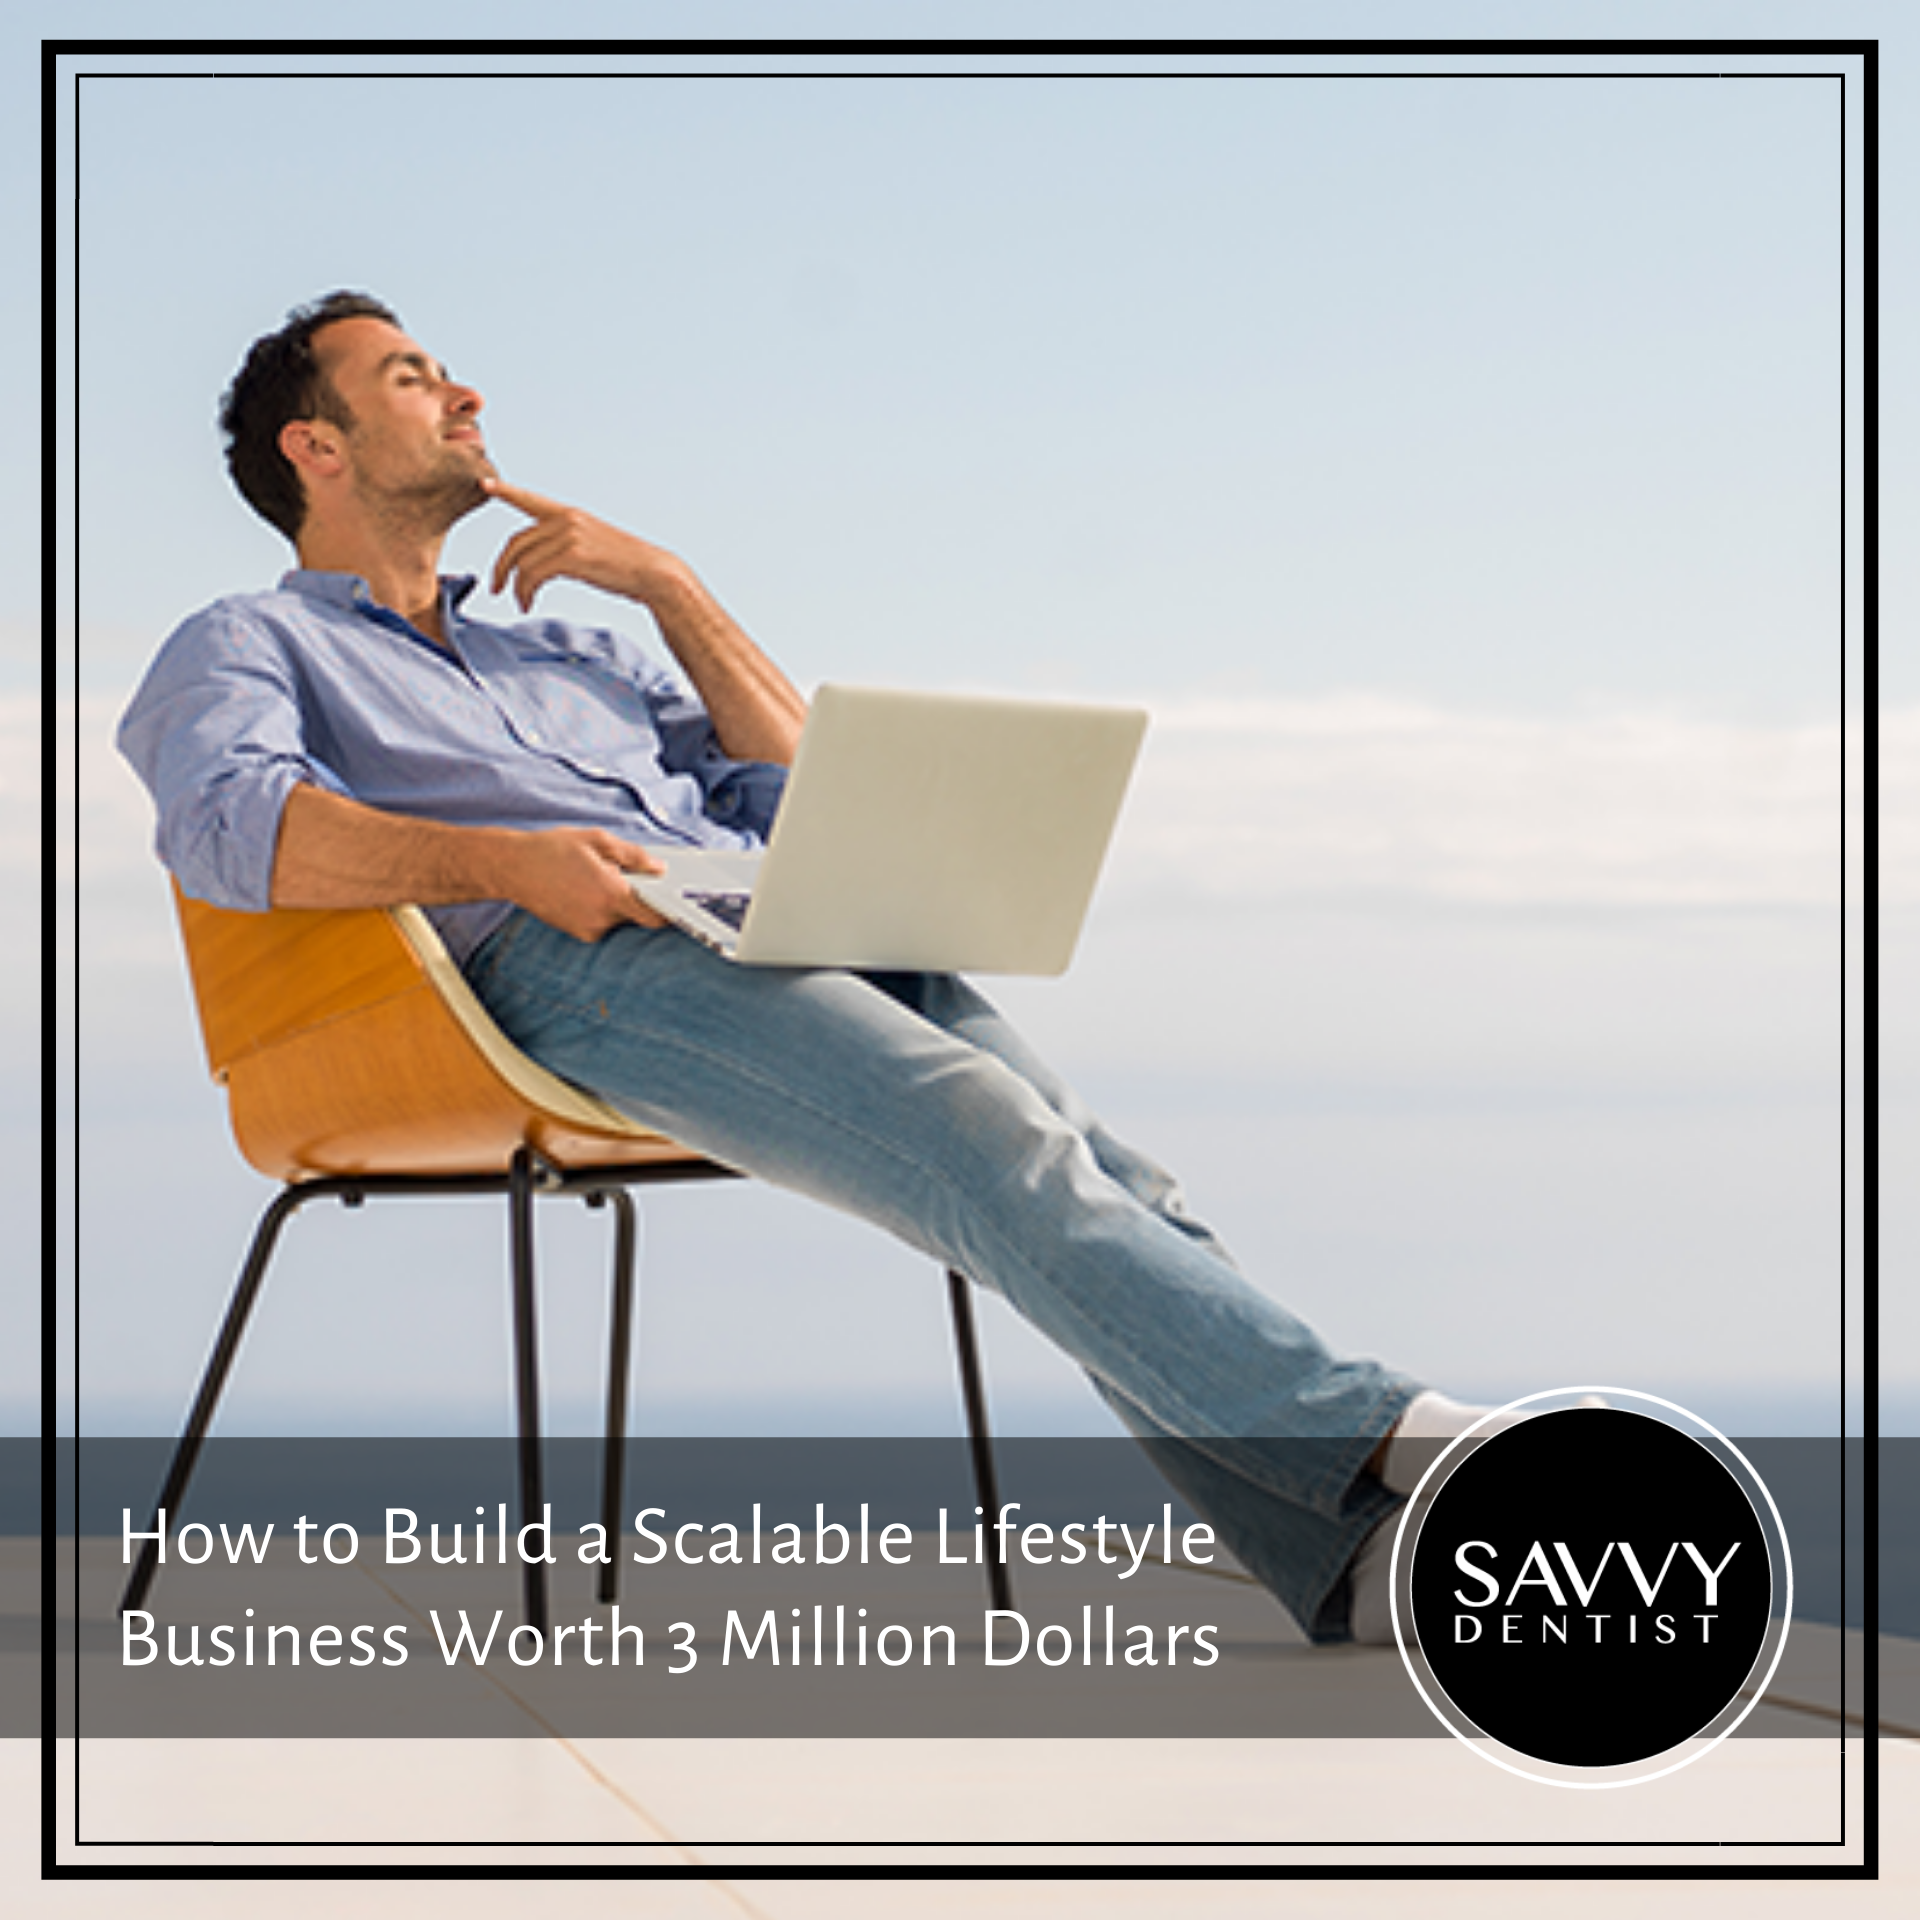 How to Build a Scalable Lifestyle Business Worth 3 Million Dollars